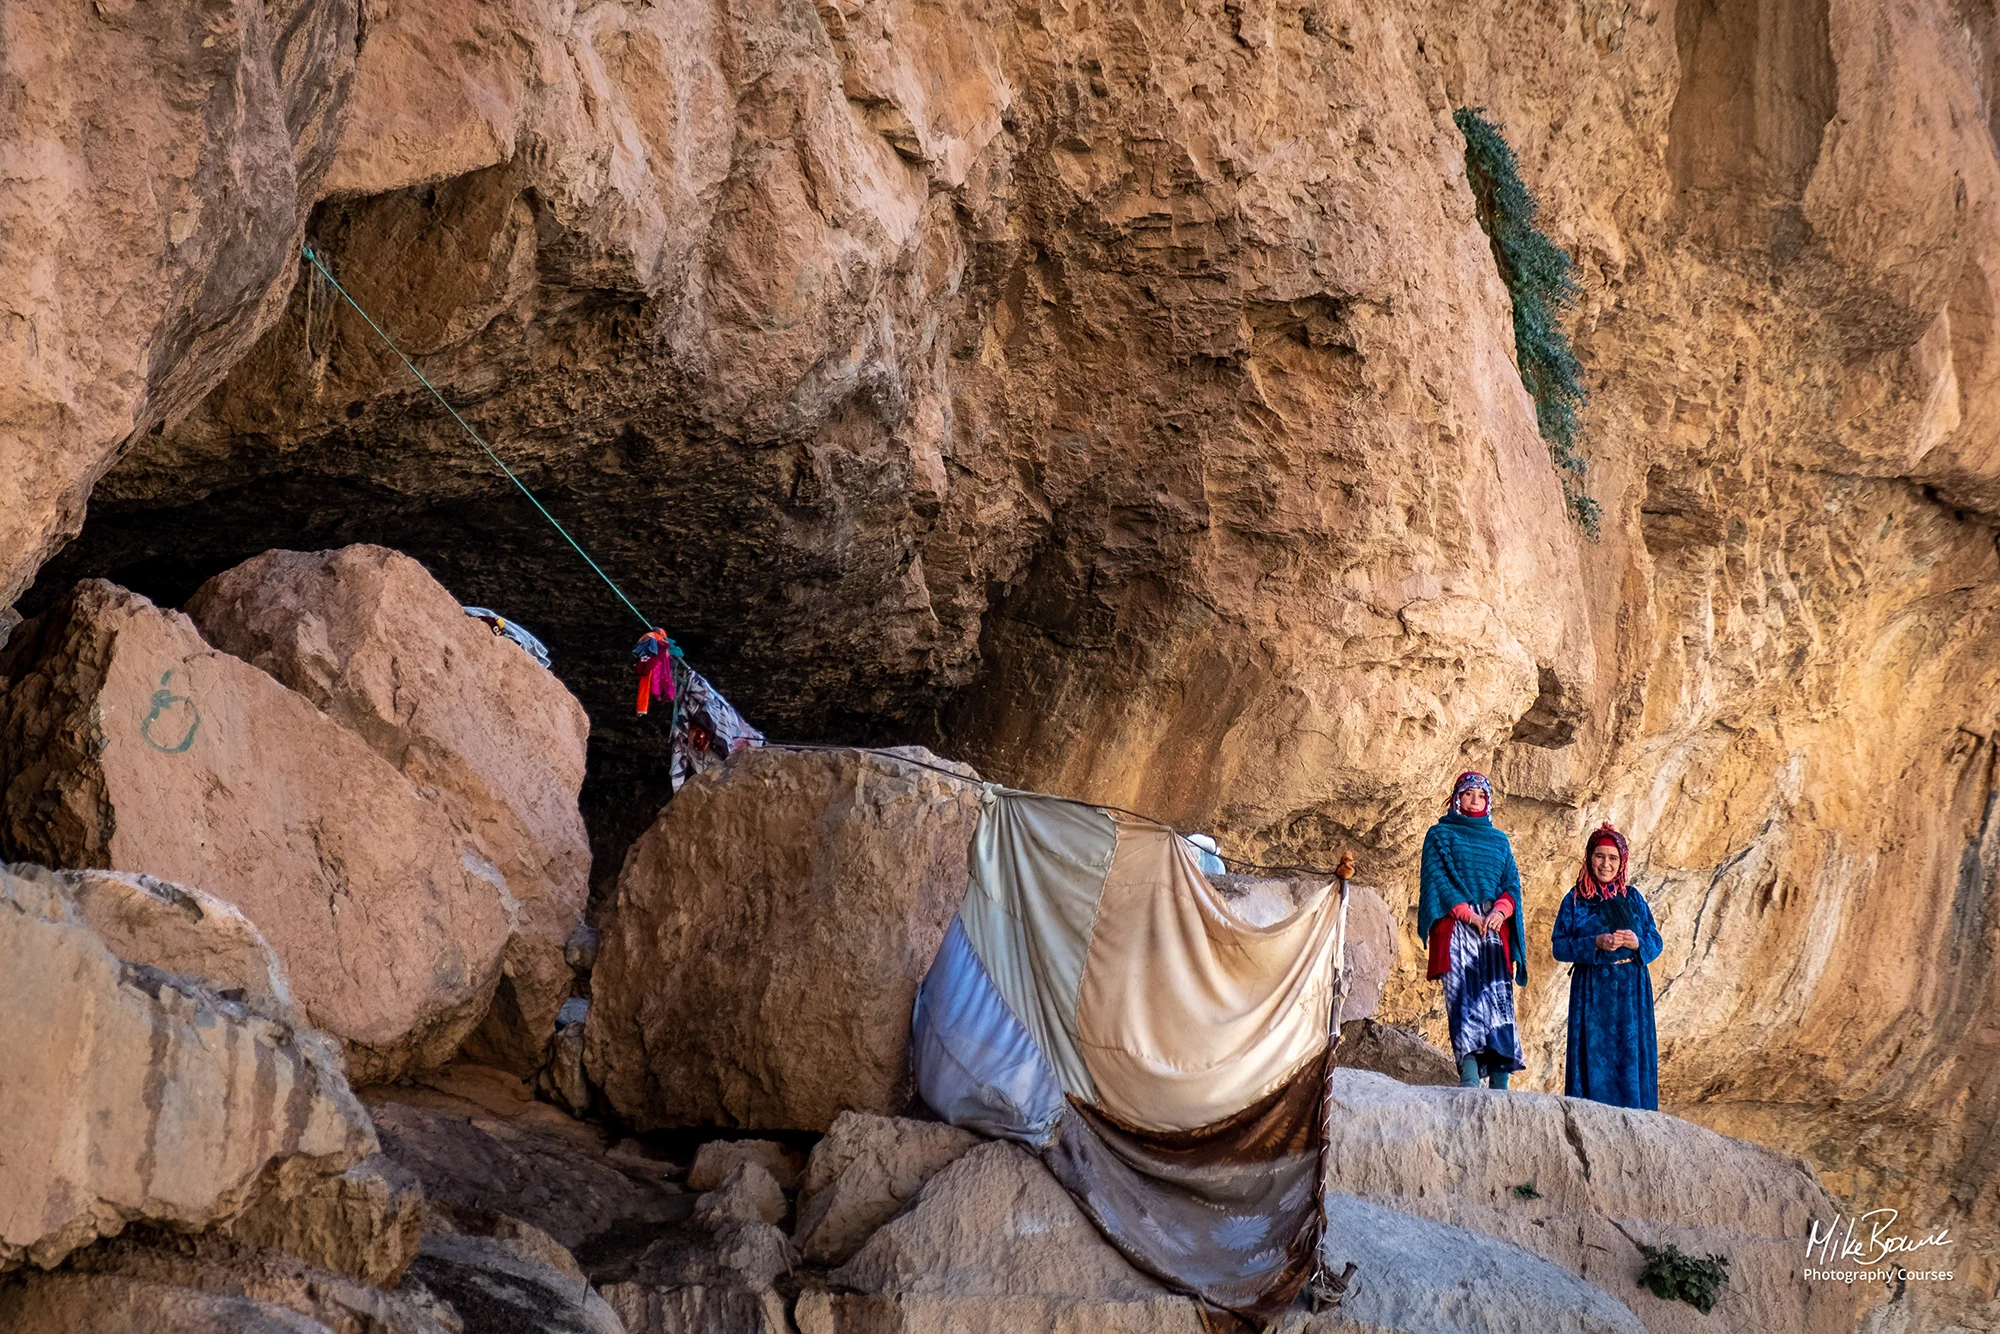 Two Moroccan women standing outside a cave with blankets hung out to dry